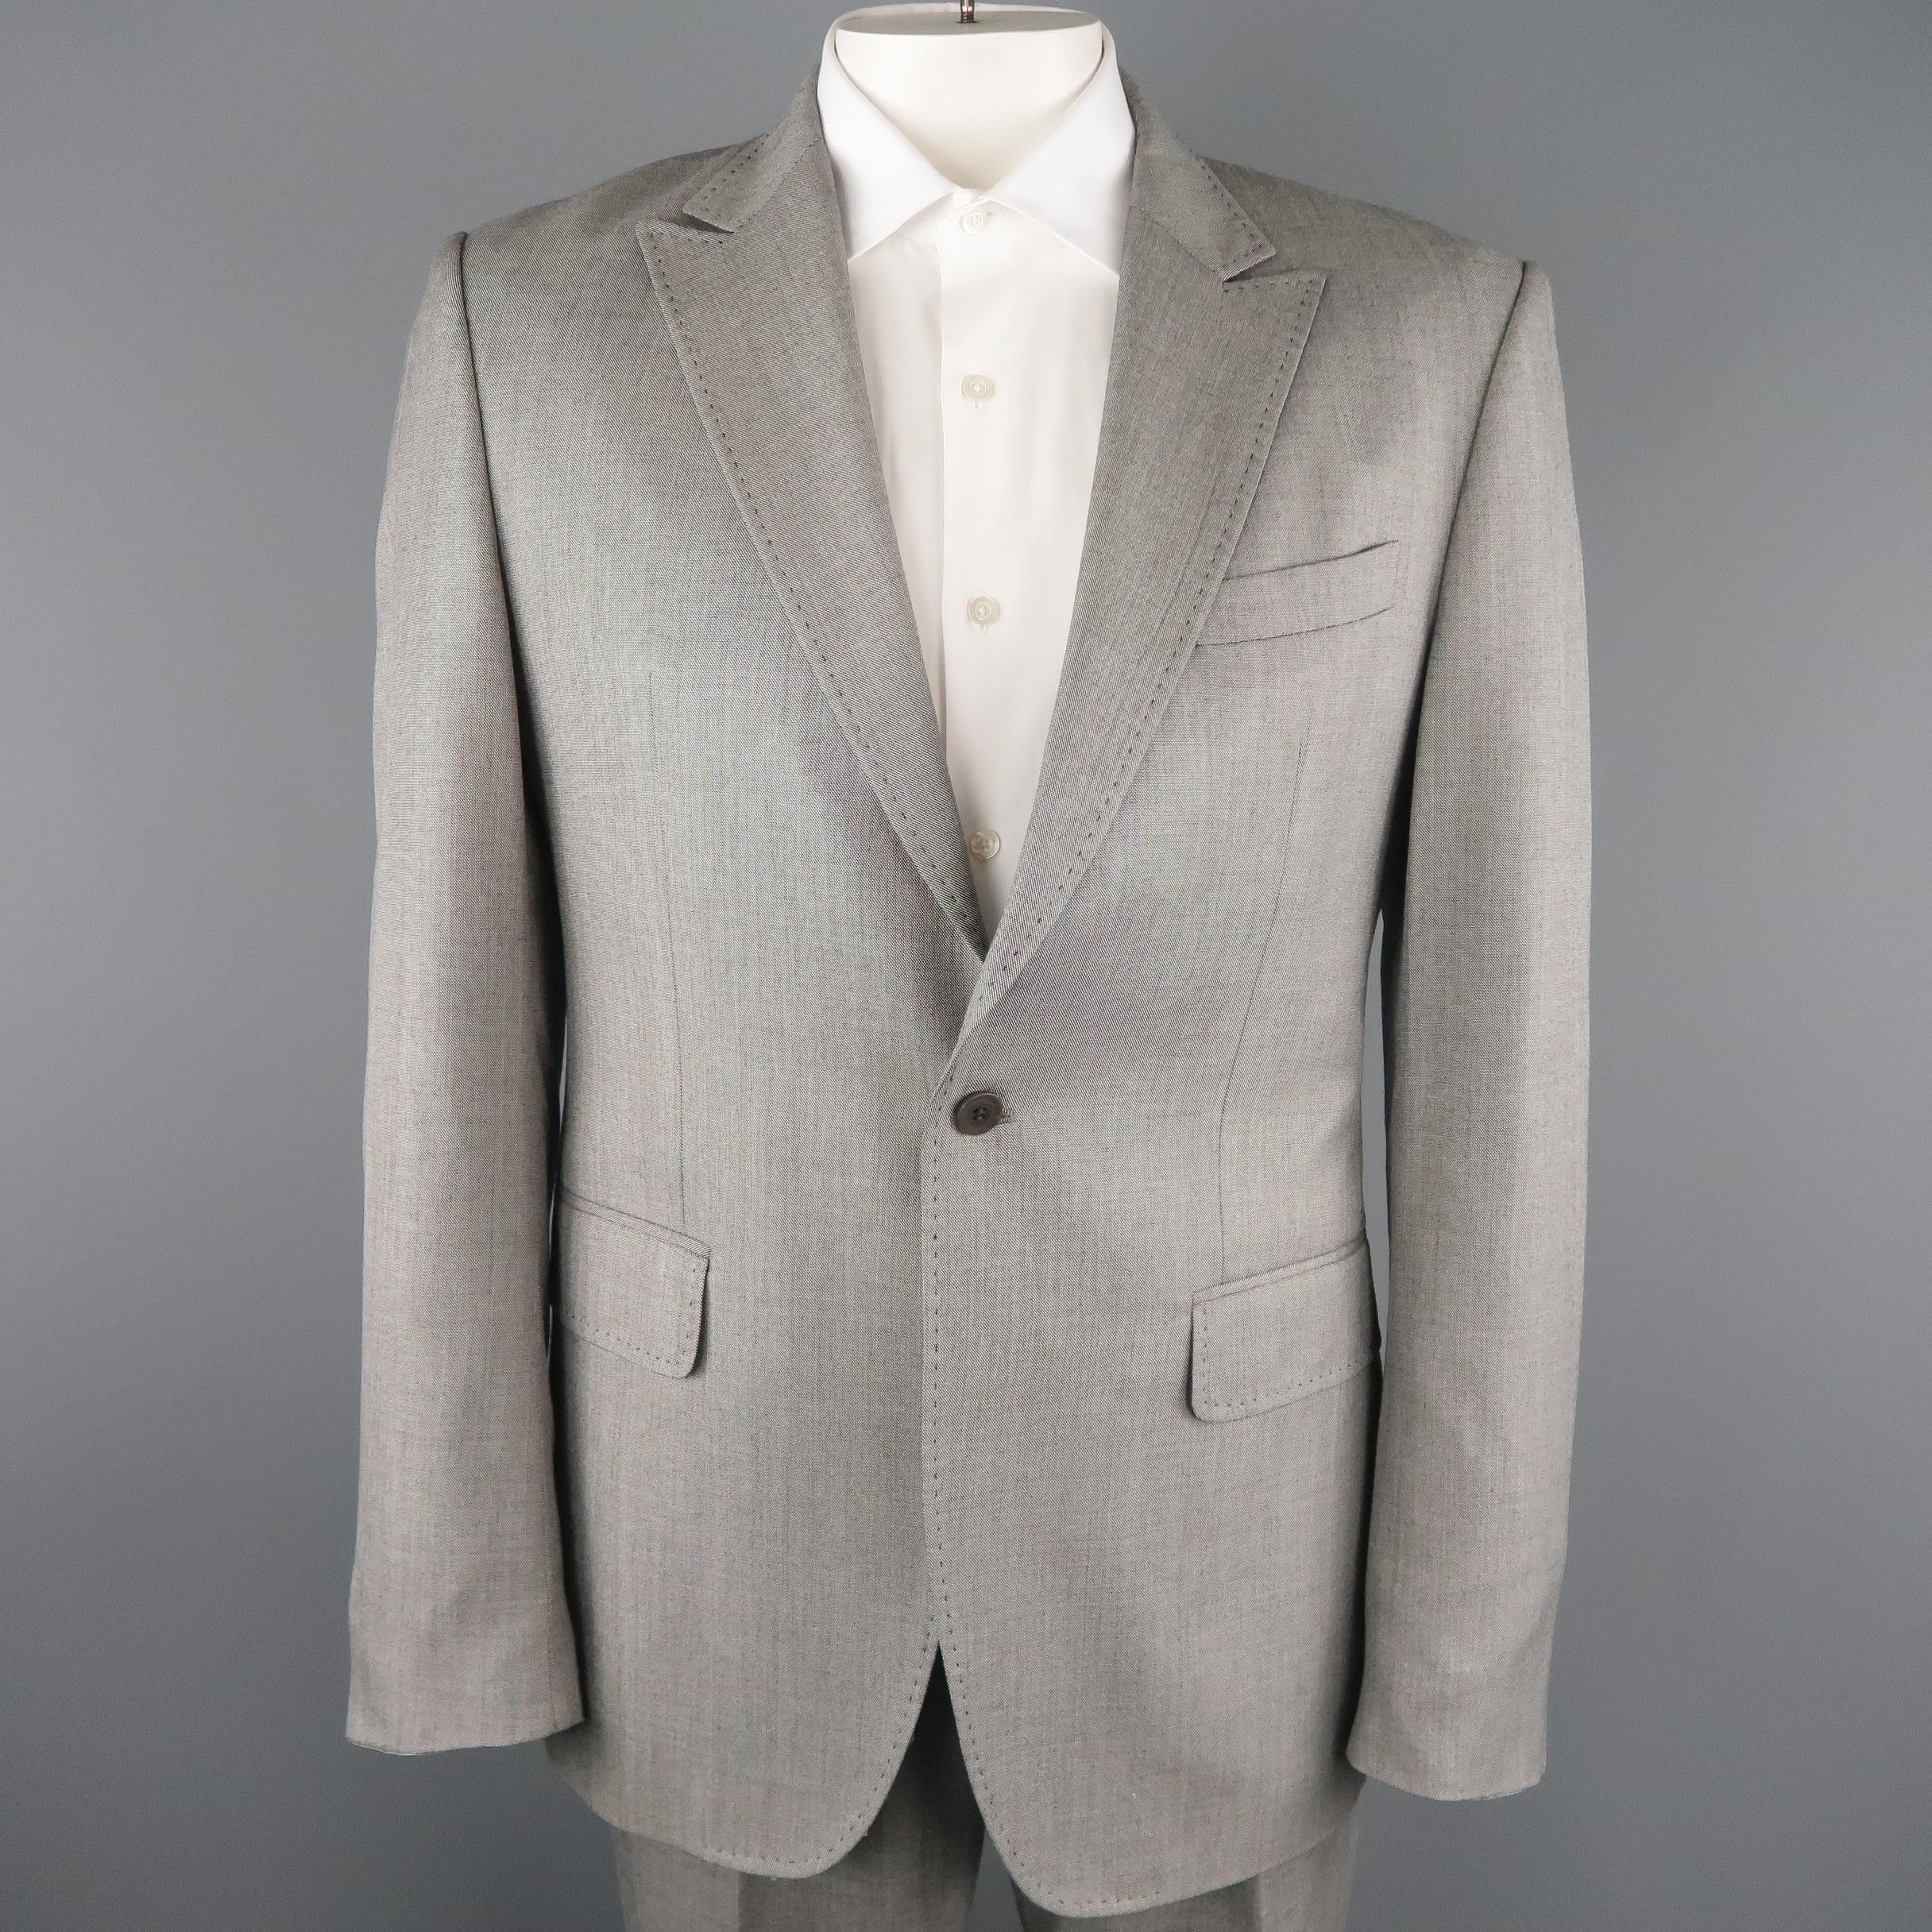 PACO RABANNE suit comes in silver gray wool blend fabric and includes a single breasted, peak lapel, one button sport coat and matching single pleat trousers.
 
Excellent Pre-Owned Condition.
Marked: 105 CM
 
Measurements:
 
-Jacket
Shoulder: 18.5